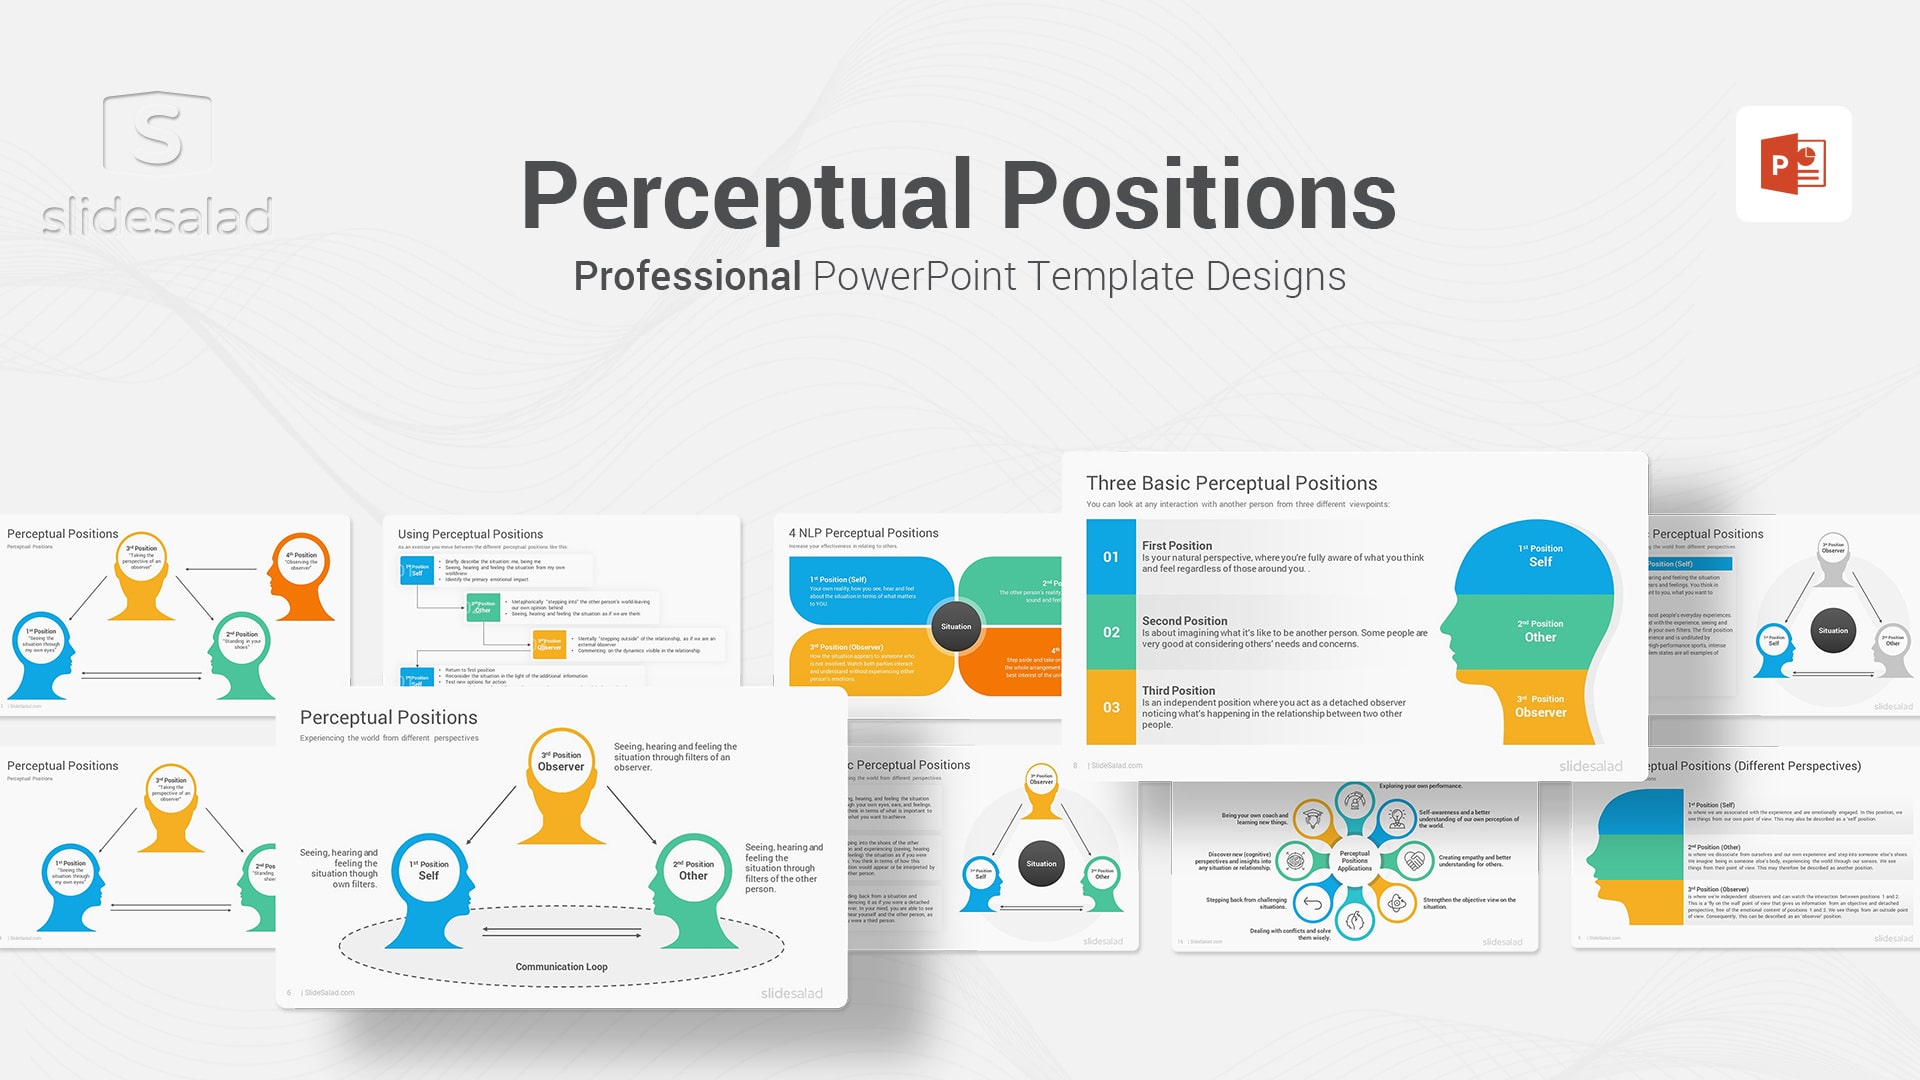 Perceptual Positions PowerPoint Template - Well-Organized PPT Template for Showcasing a Compelling Presentation About the Reframing Exercise Perceptual Positions